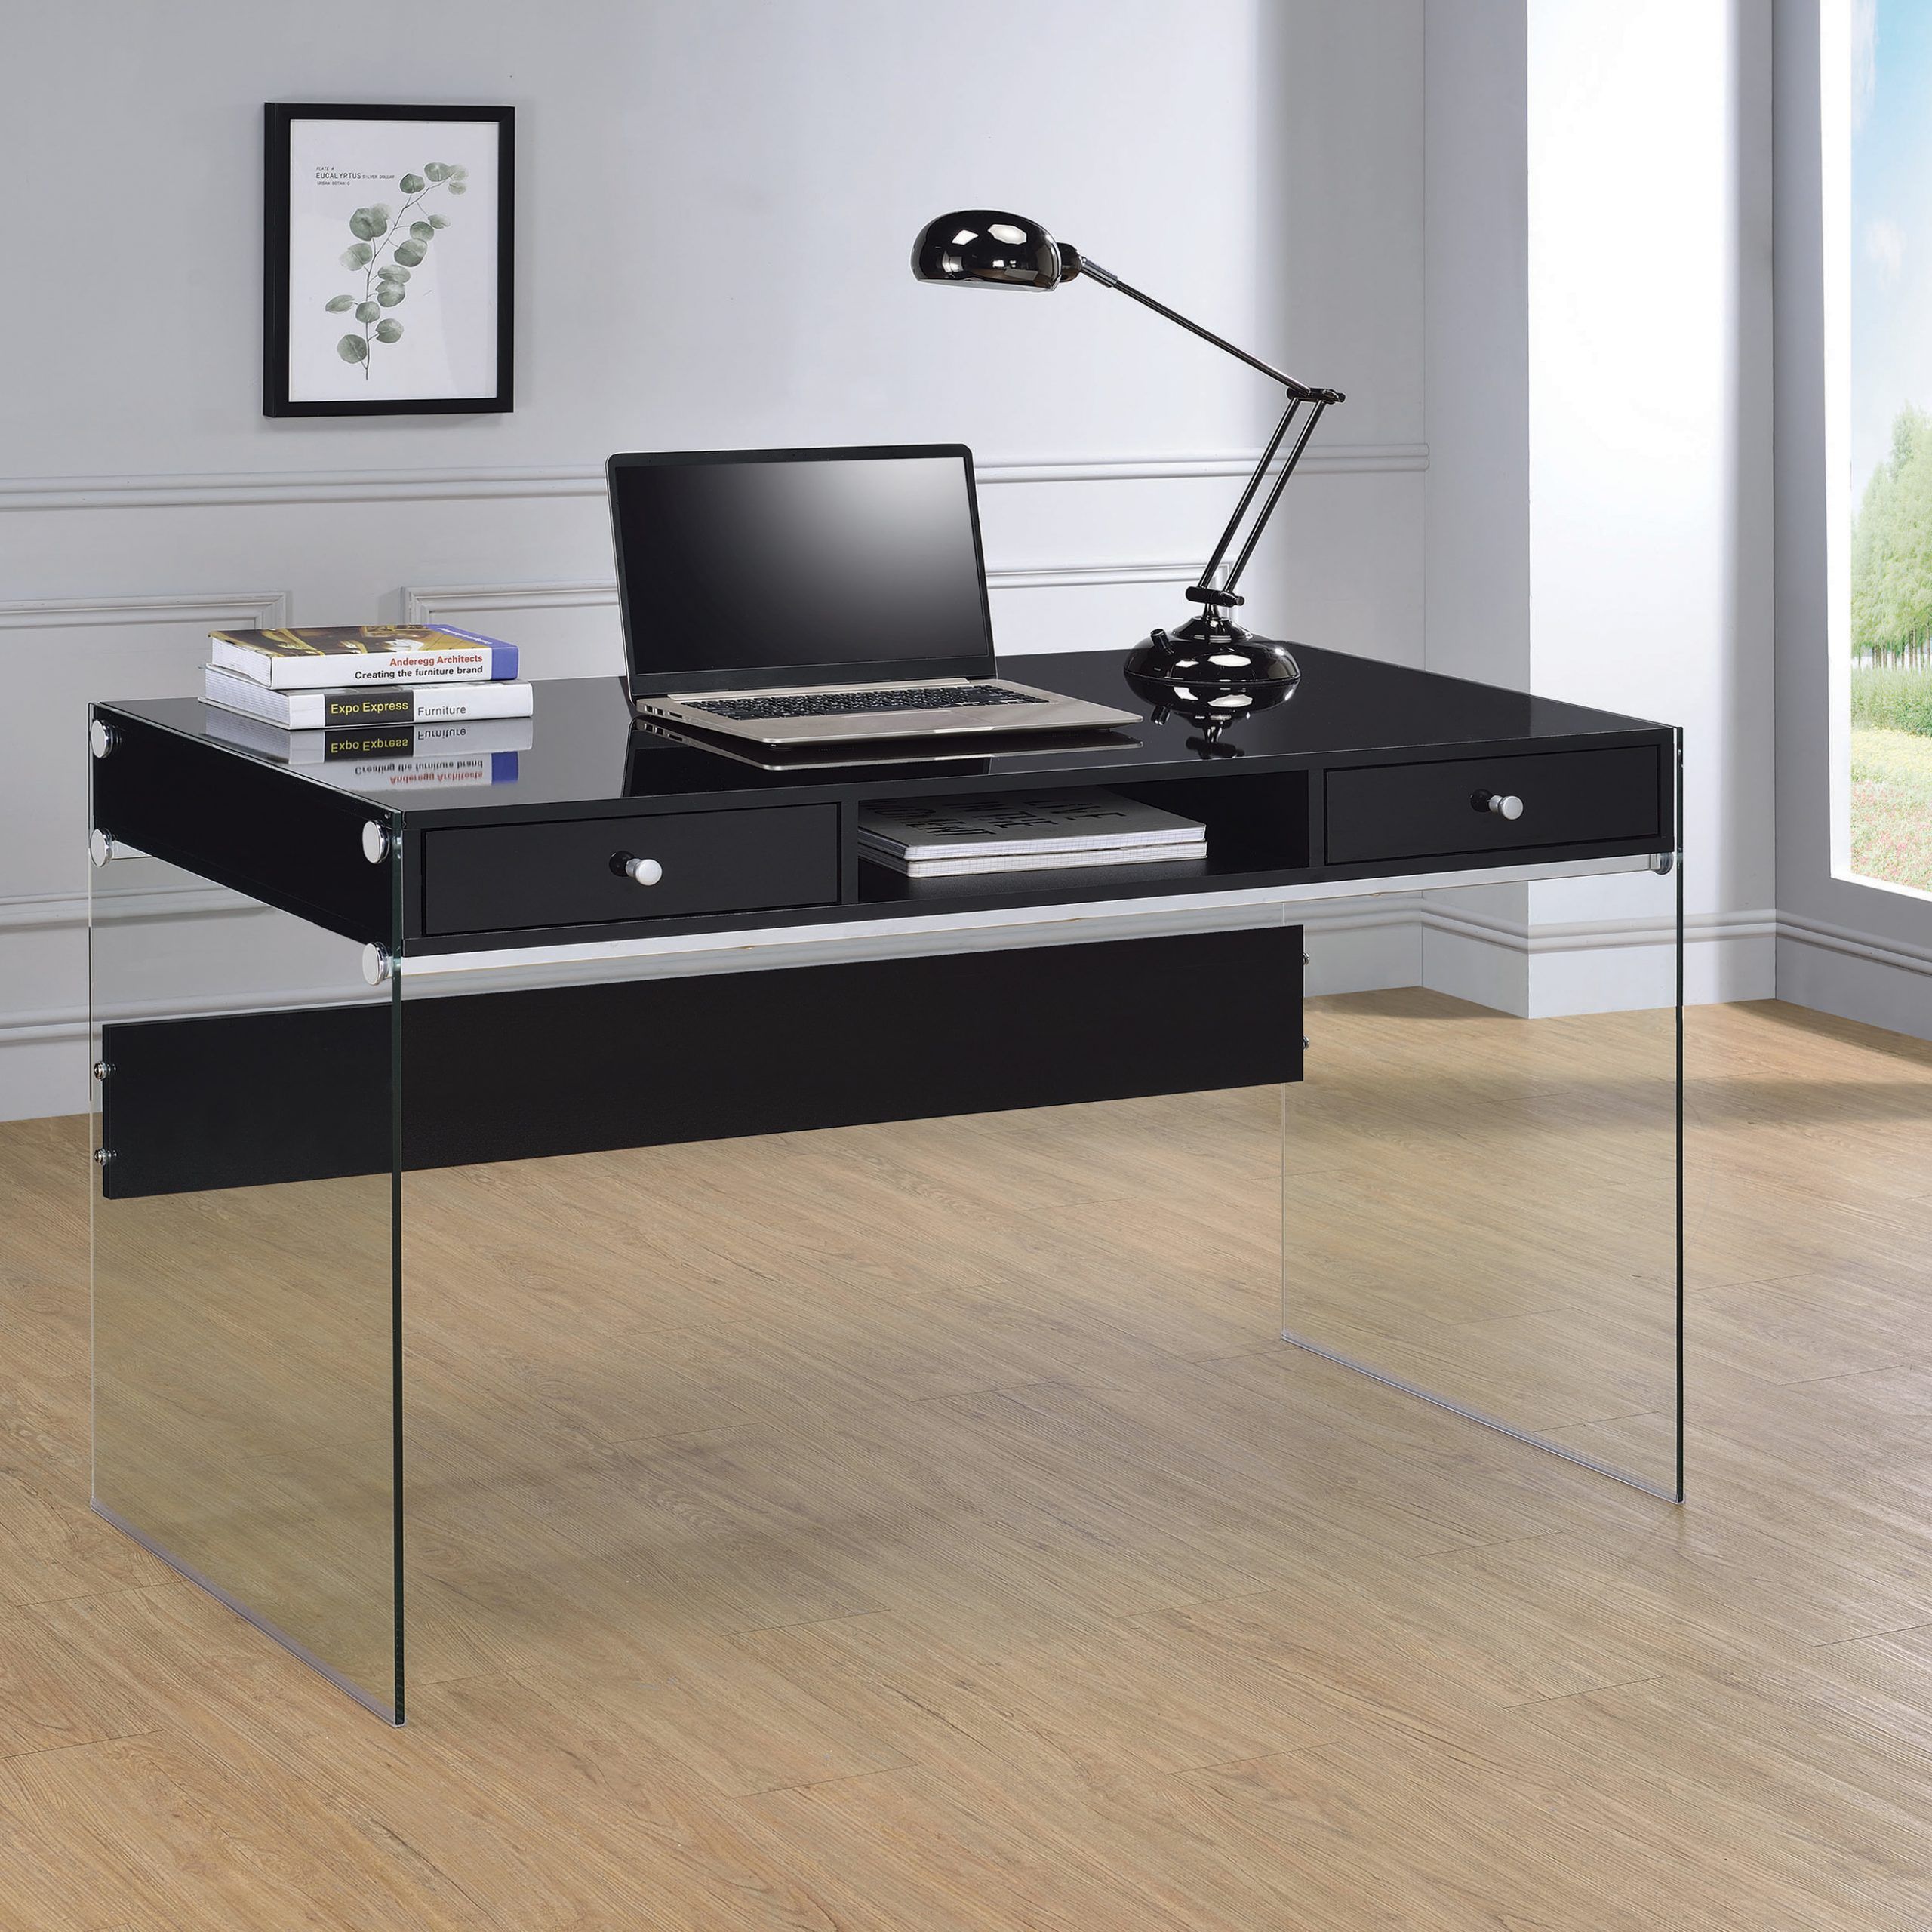 Dobrev 2 Drawer Writing Desk Glossy Black And Clear – Coaste With Regard To Black And Gray Oval Writing Desks (View 7 of 15)